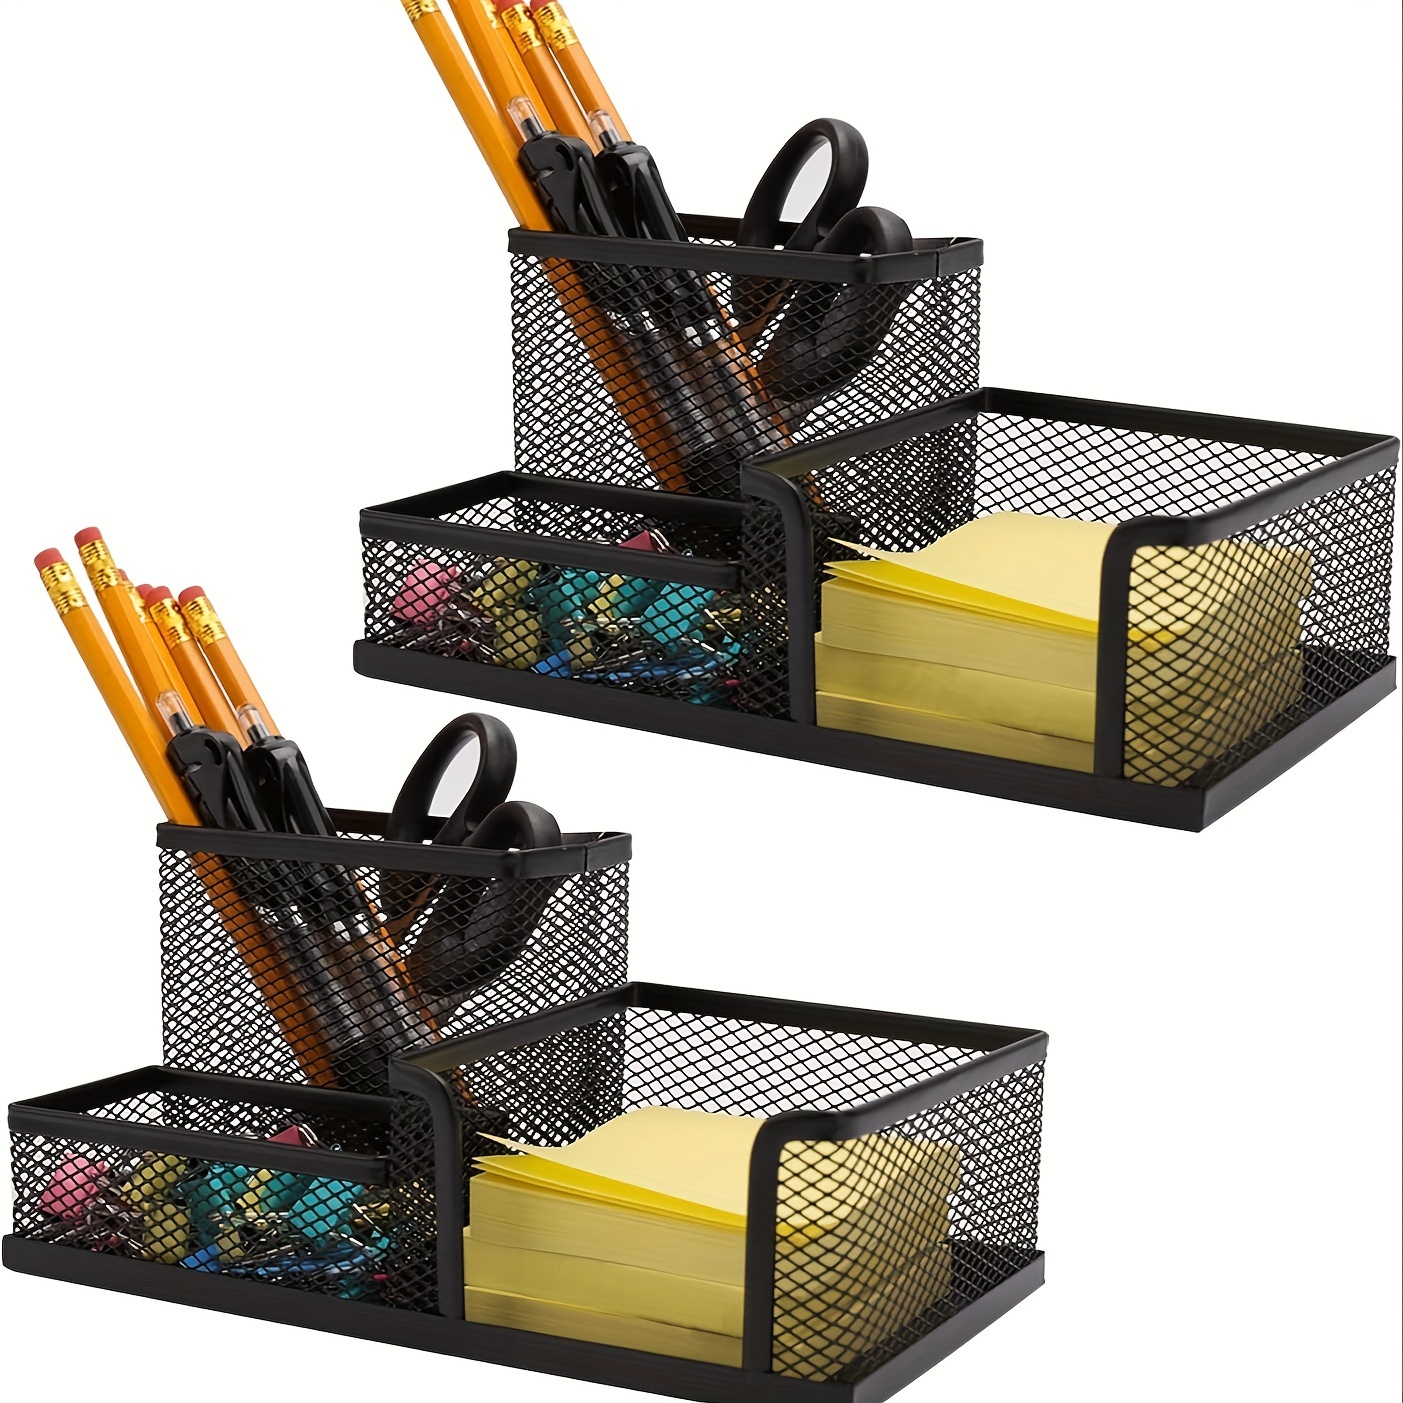 

compact" 1pc Sleek Black Metal Pen Holder With 3 Compartments - Durable Iron Craft Desk Organizer For Office And Student Stationery Storage